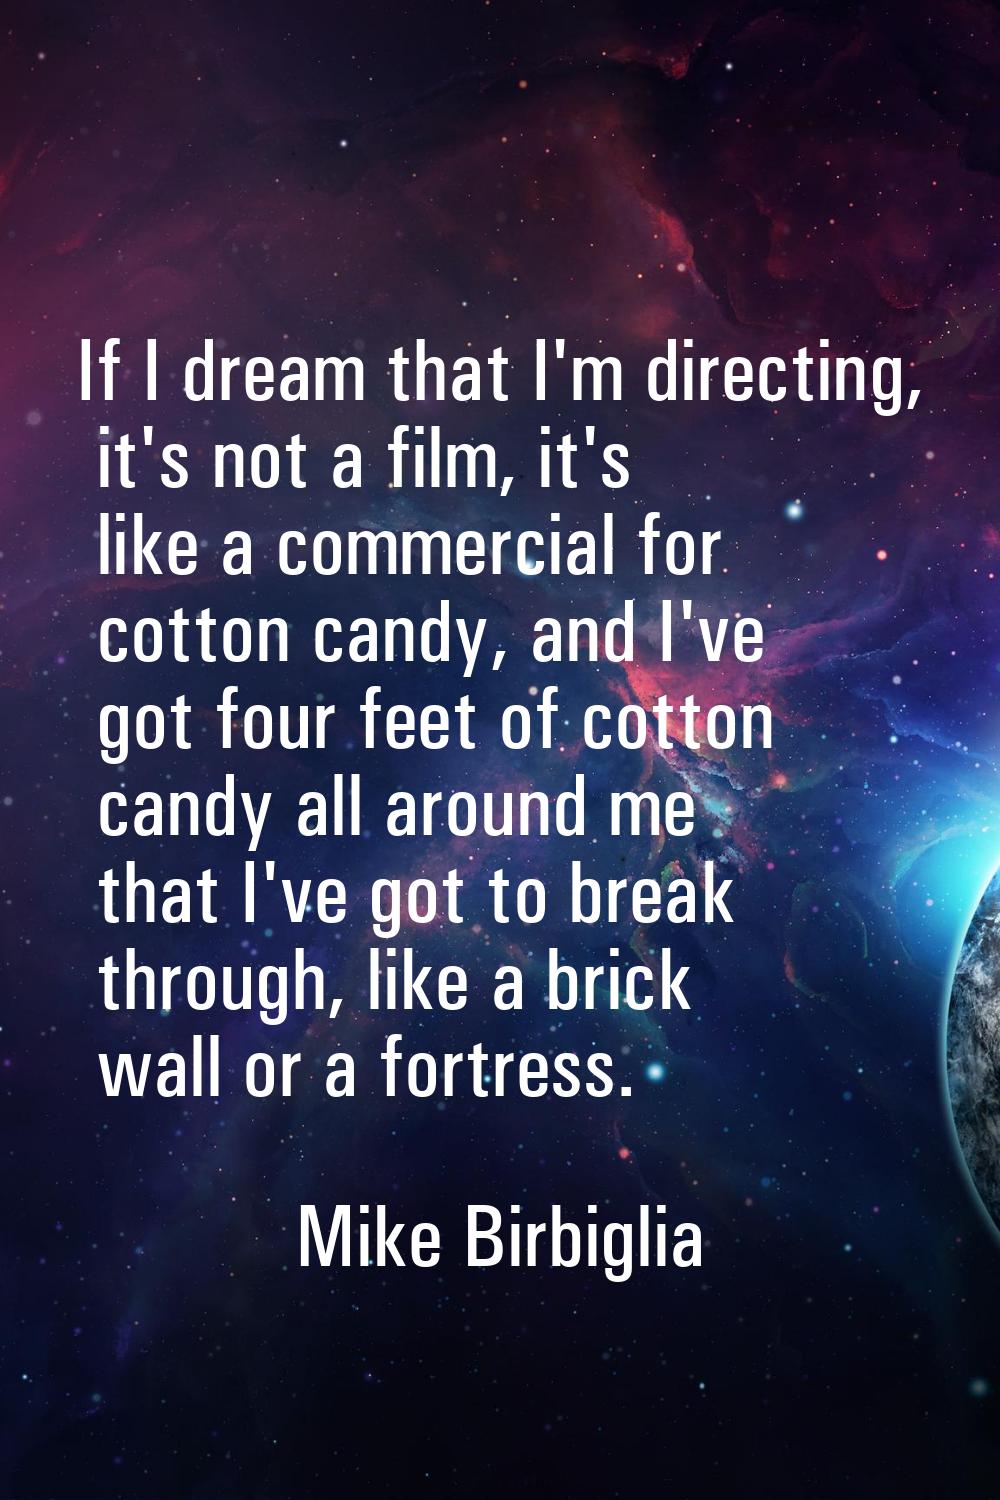 If I dream that I'm directing, it's not a film, it's like a commercial for cotton candy, and I've g